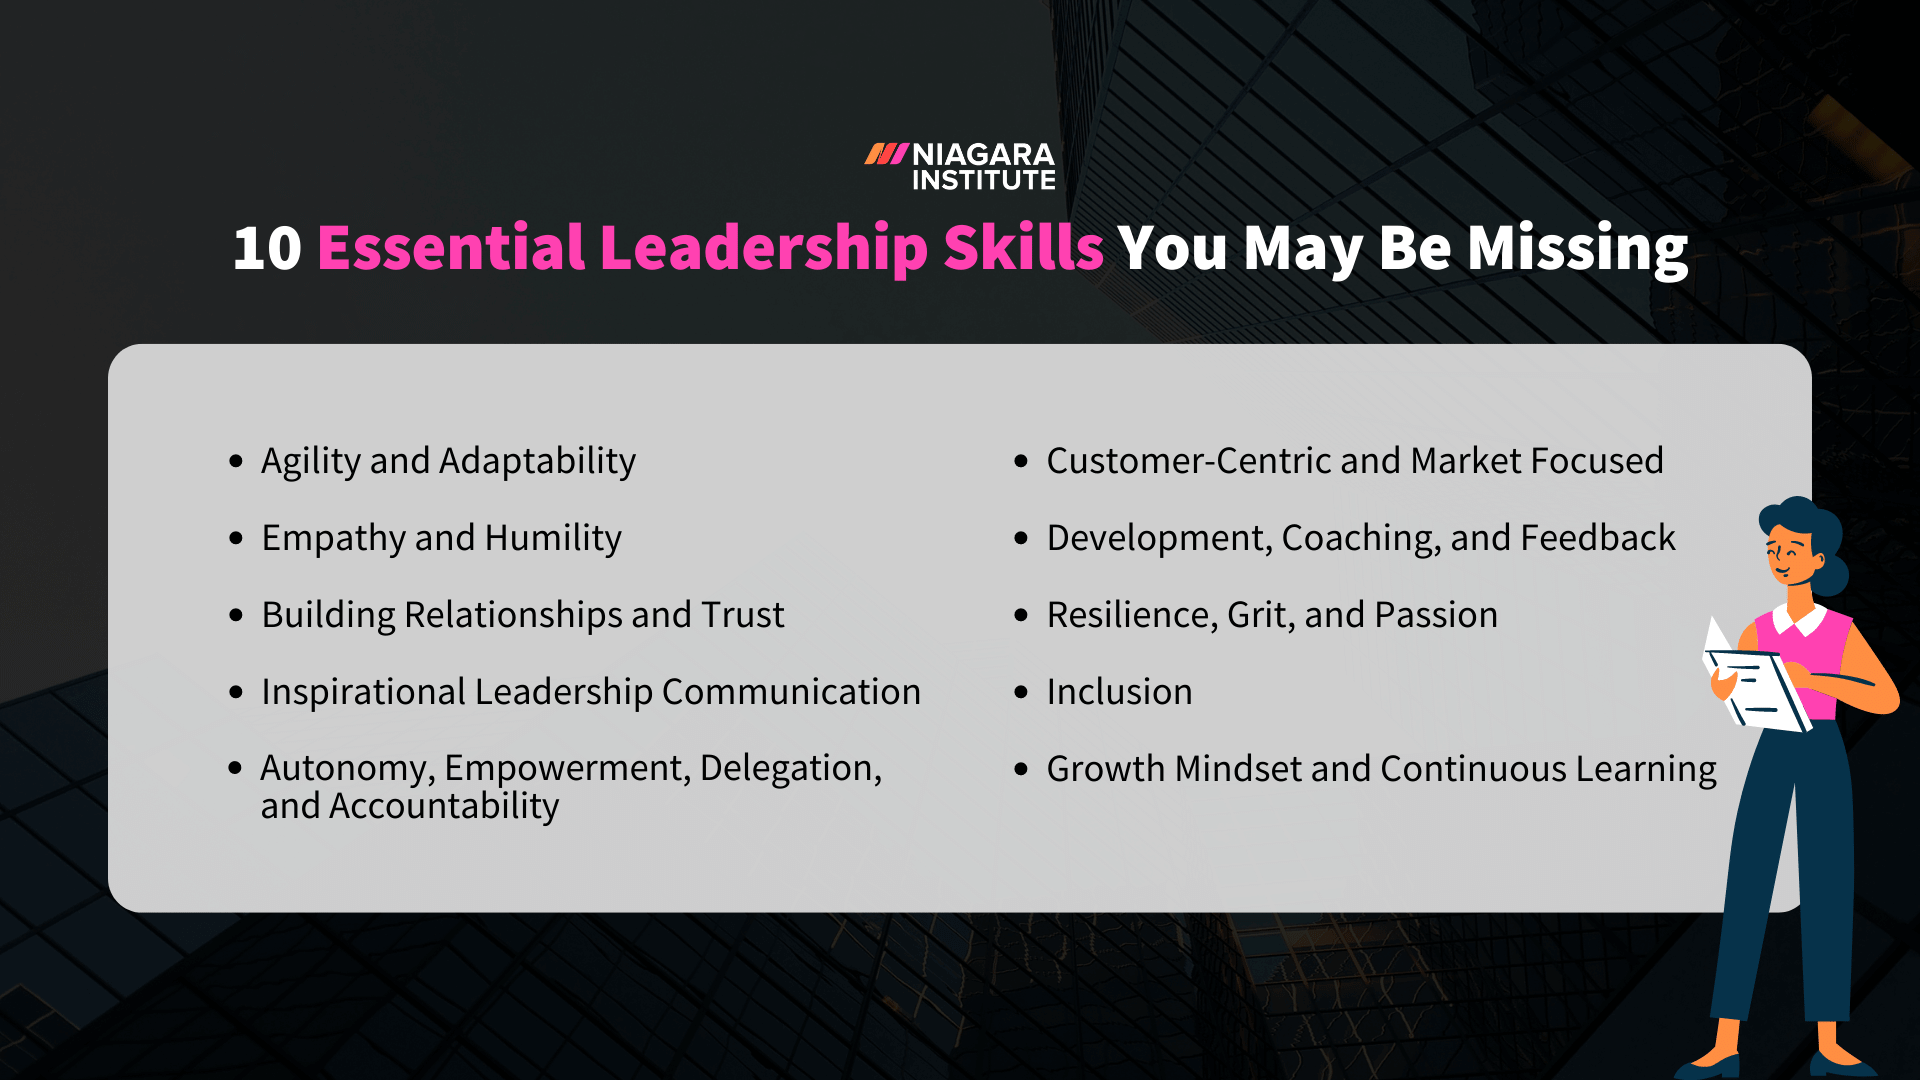 10 Essential Leadership Skills You May Be Missing Image